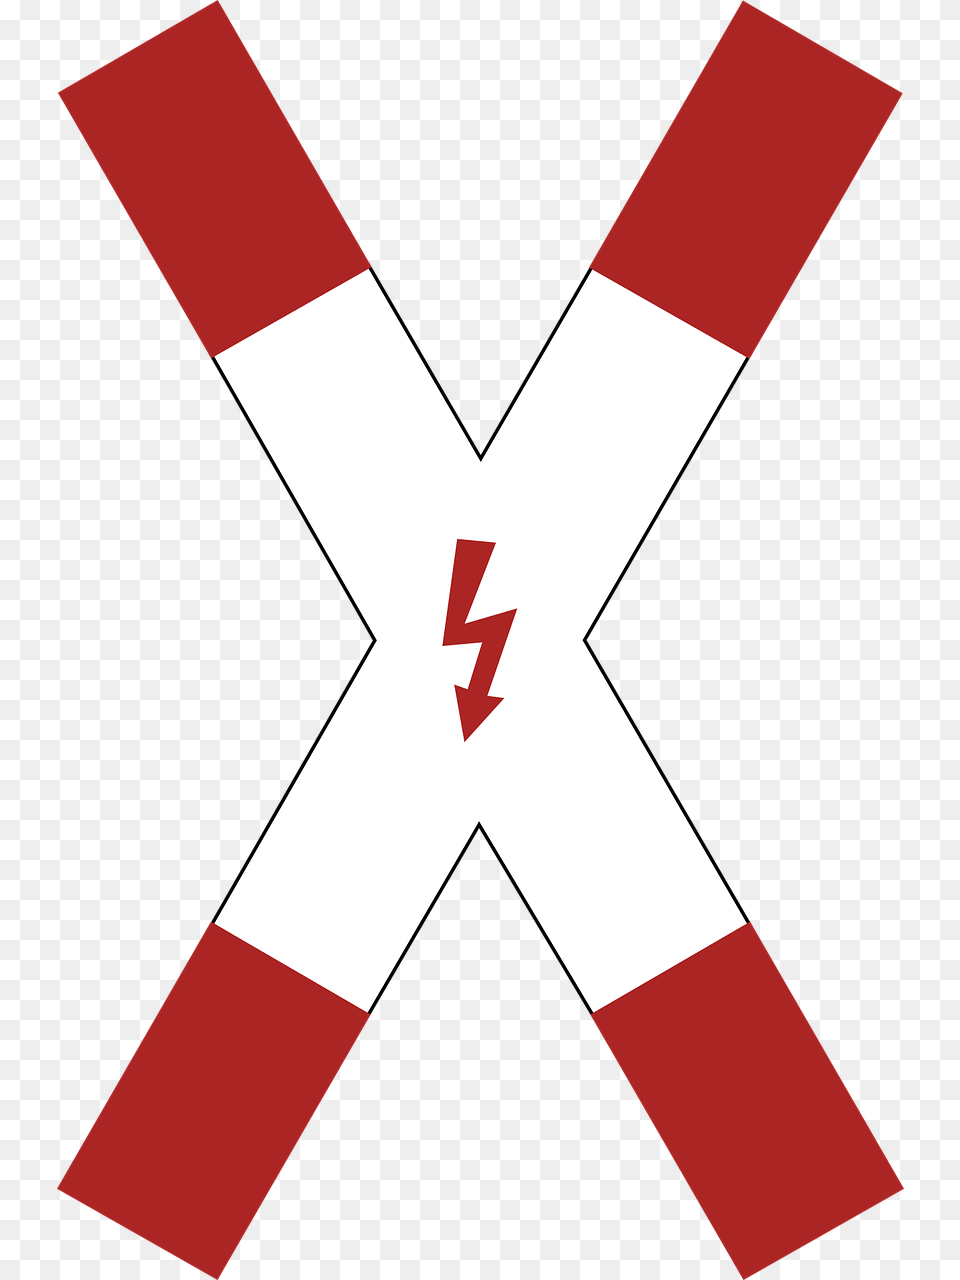 Danger Warning Cross Road Sign Germany Traffic Germany Railroad Crossing Sign, Flag Free Transparent Png